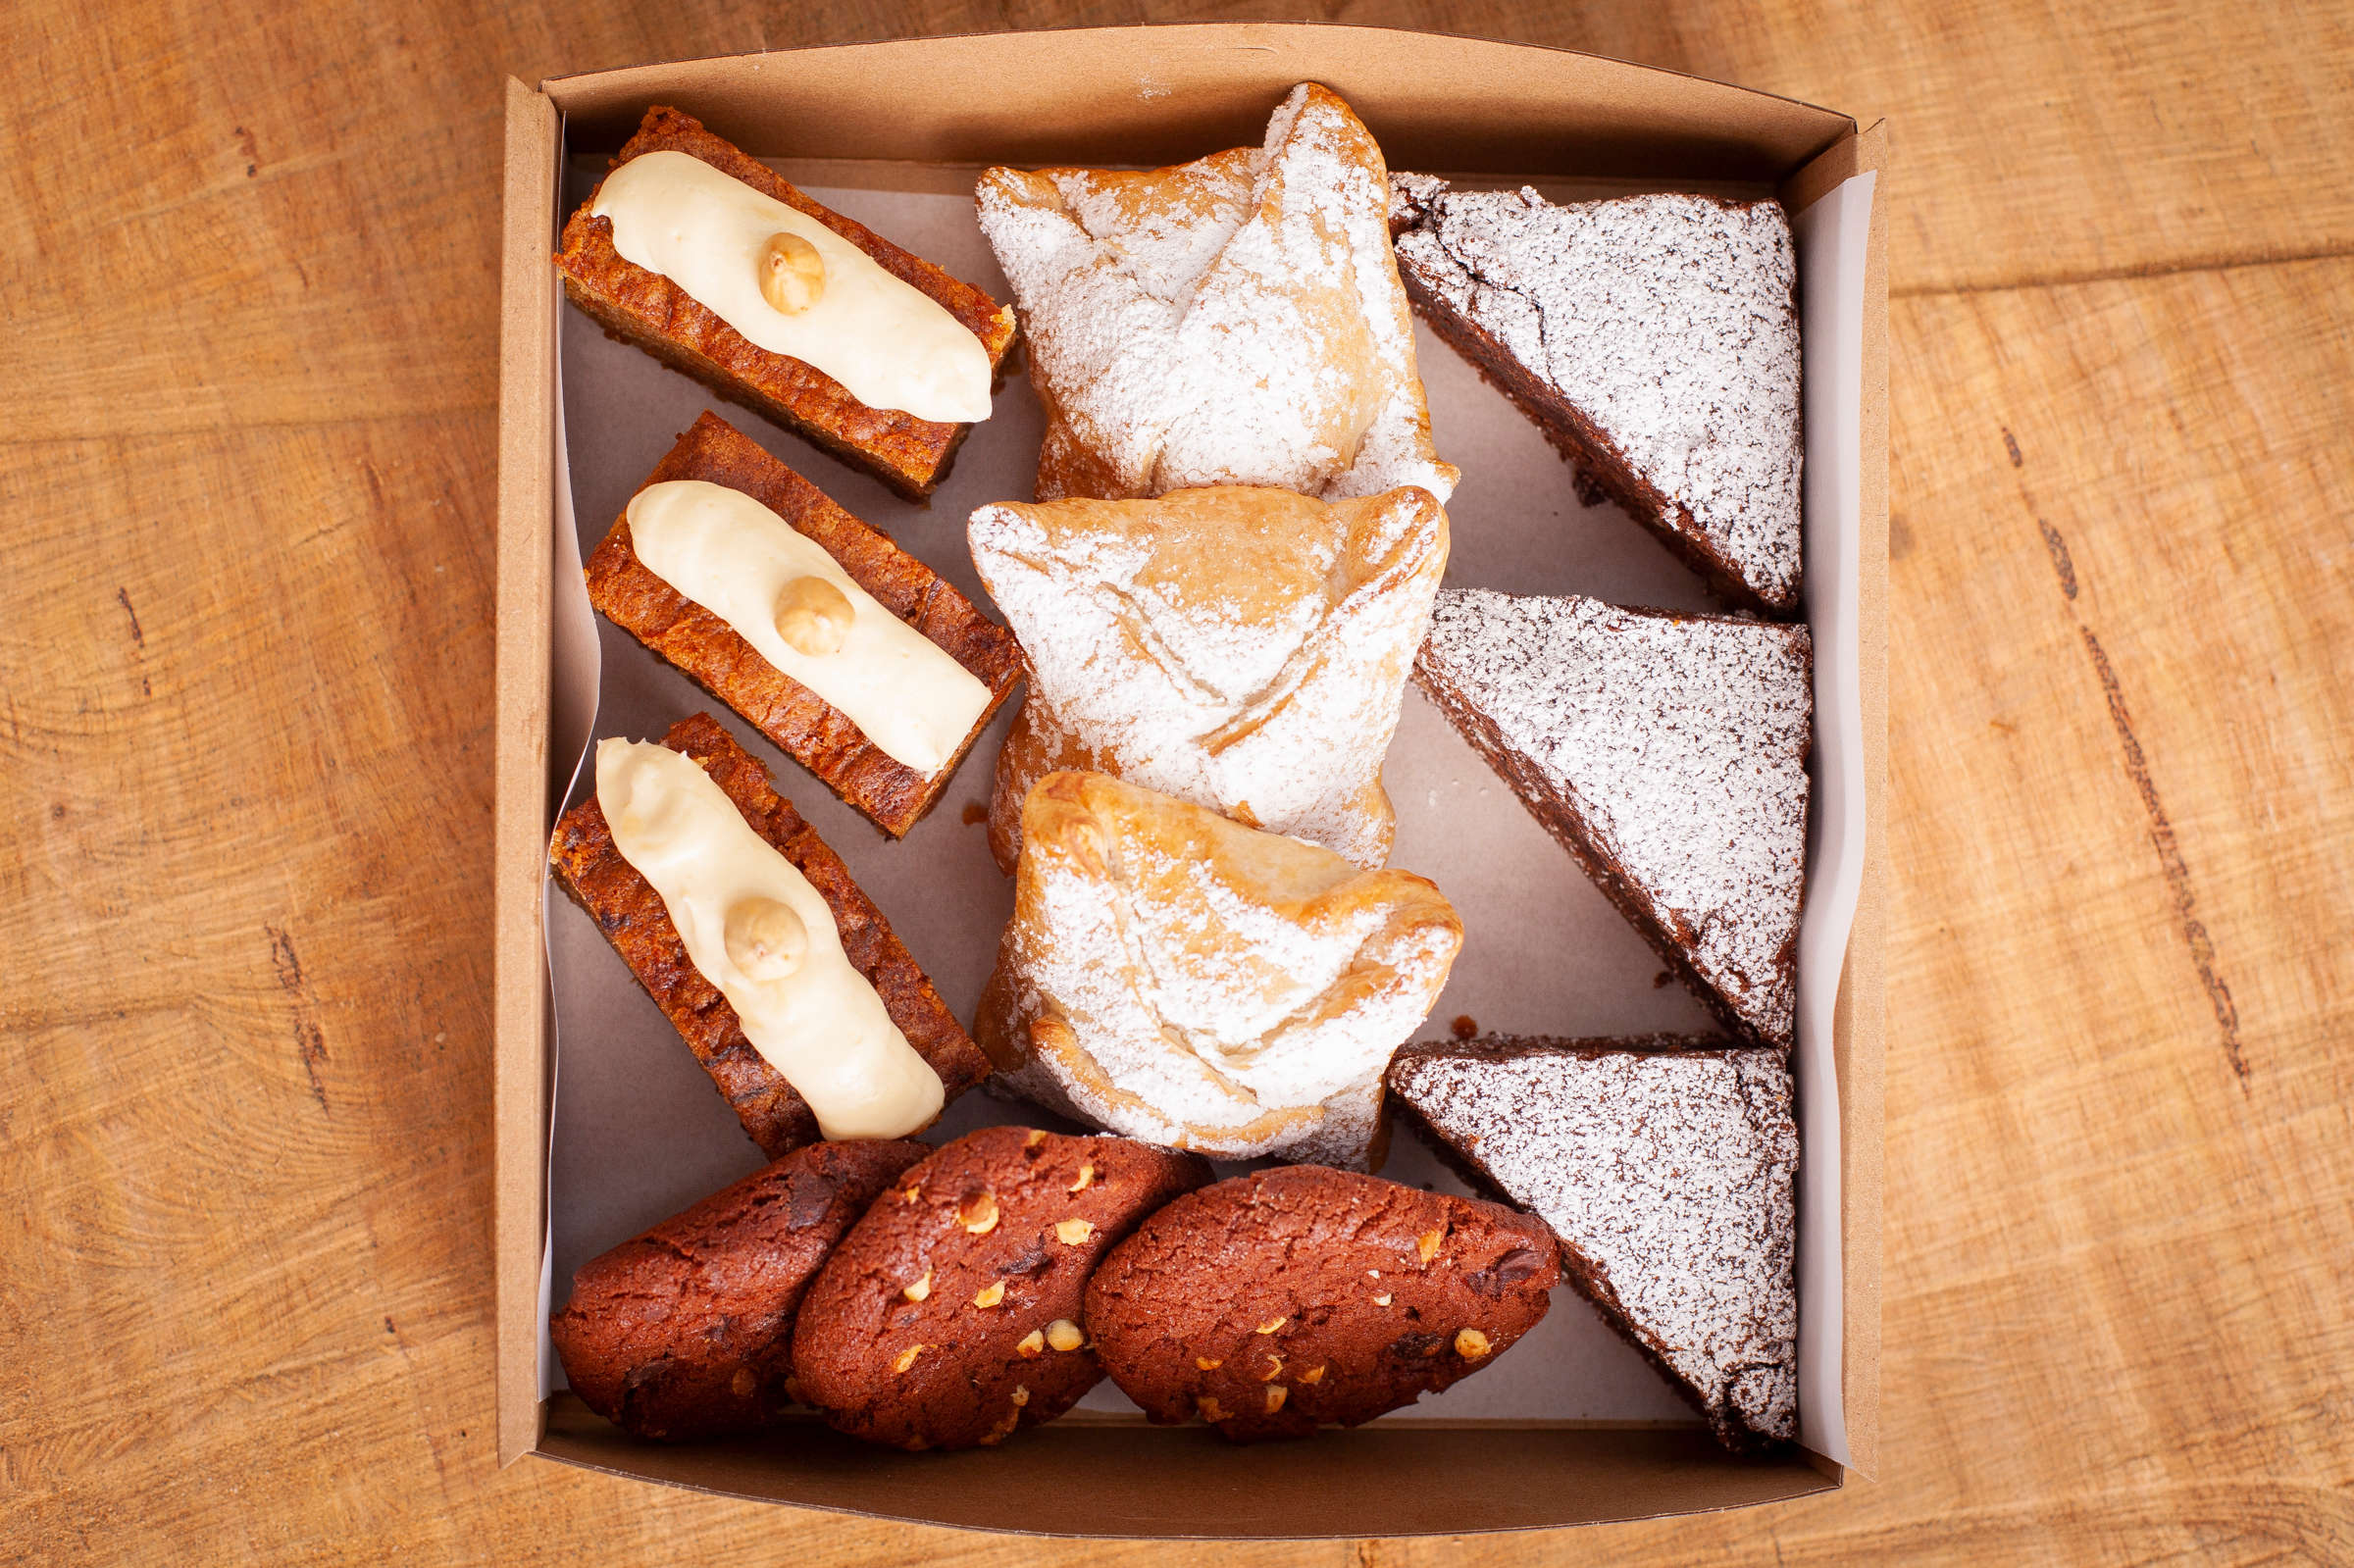 Small sweet selection box containing 12 items including chocolate brownie, Danish pastries, Carrot cake with cream cheese icing, Cookies. Credit: Richard Jupe.